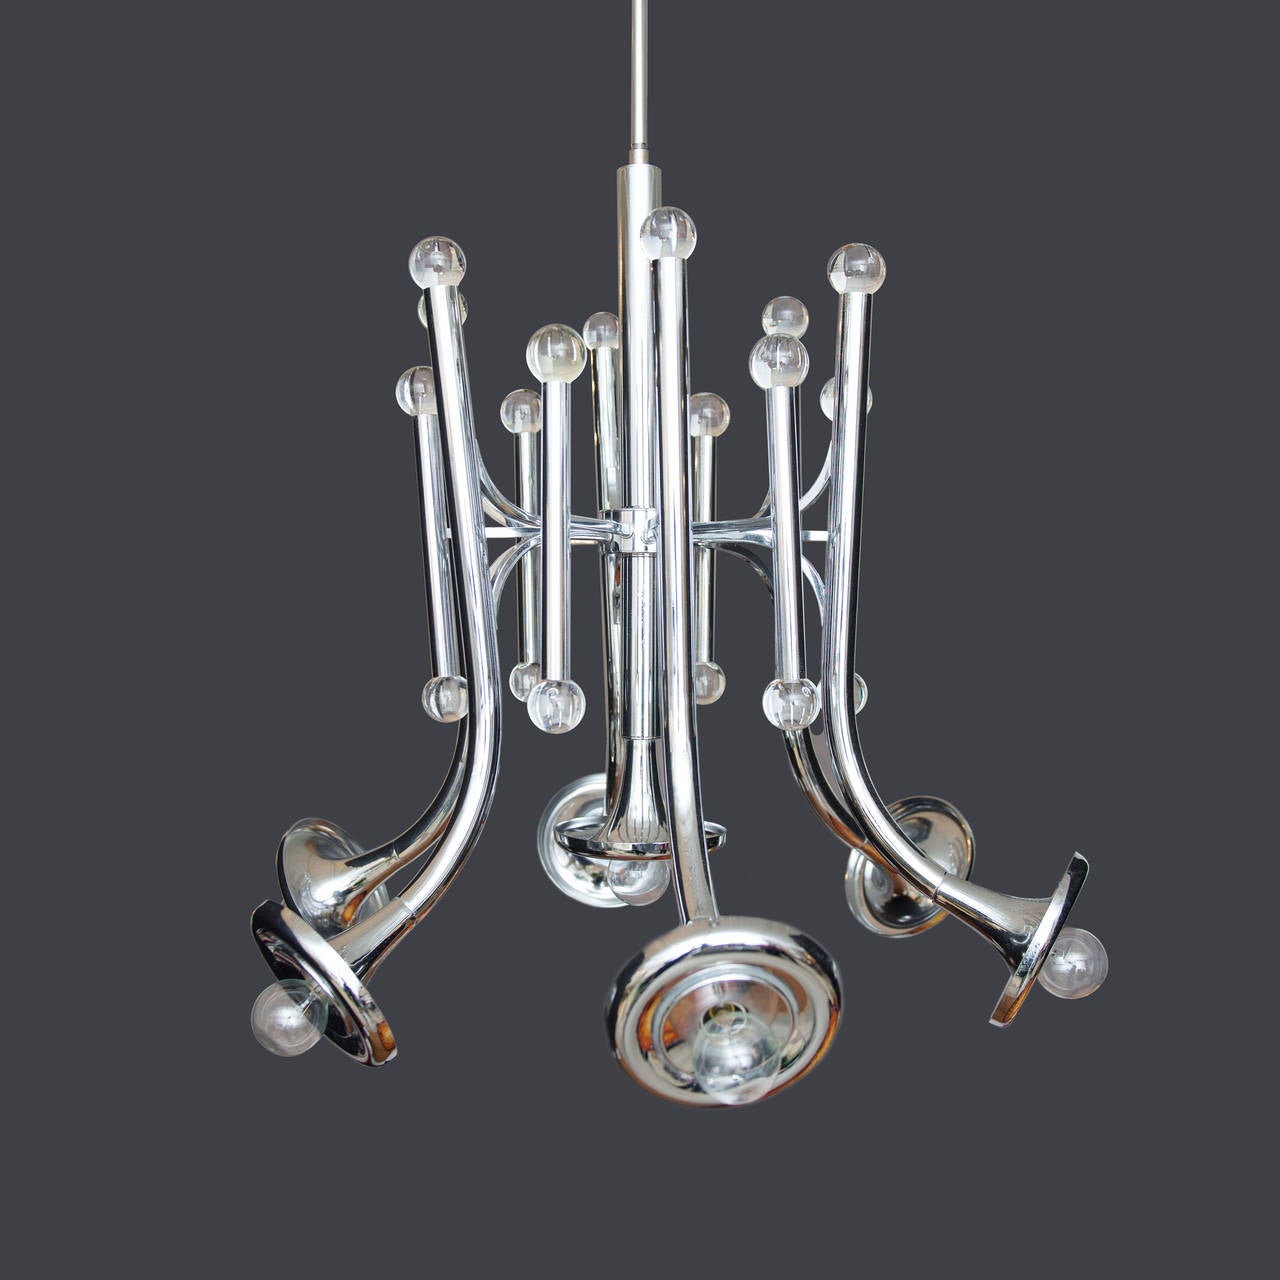 Impressive large Italian chrome and glass trumpet chandelier by Gaetano Sciolari from the 1960s.